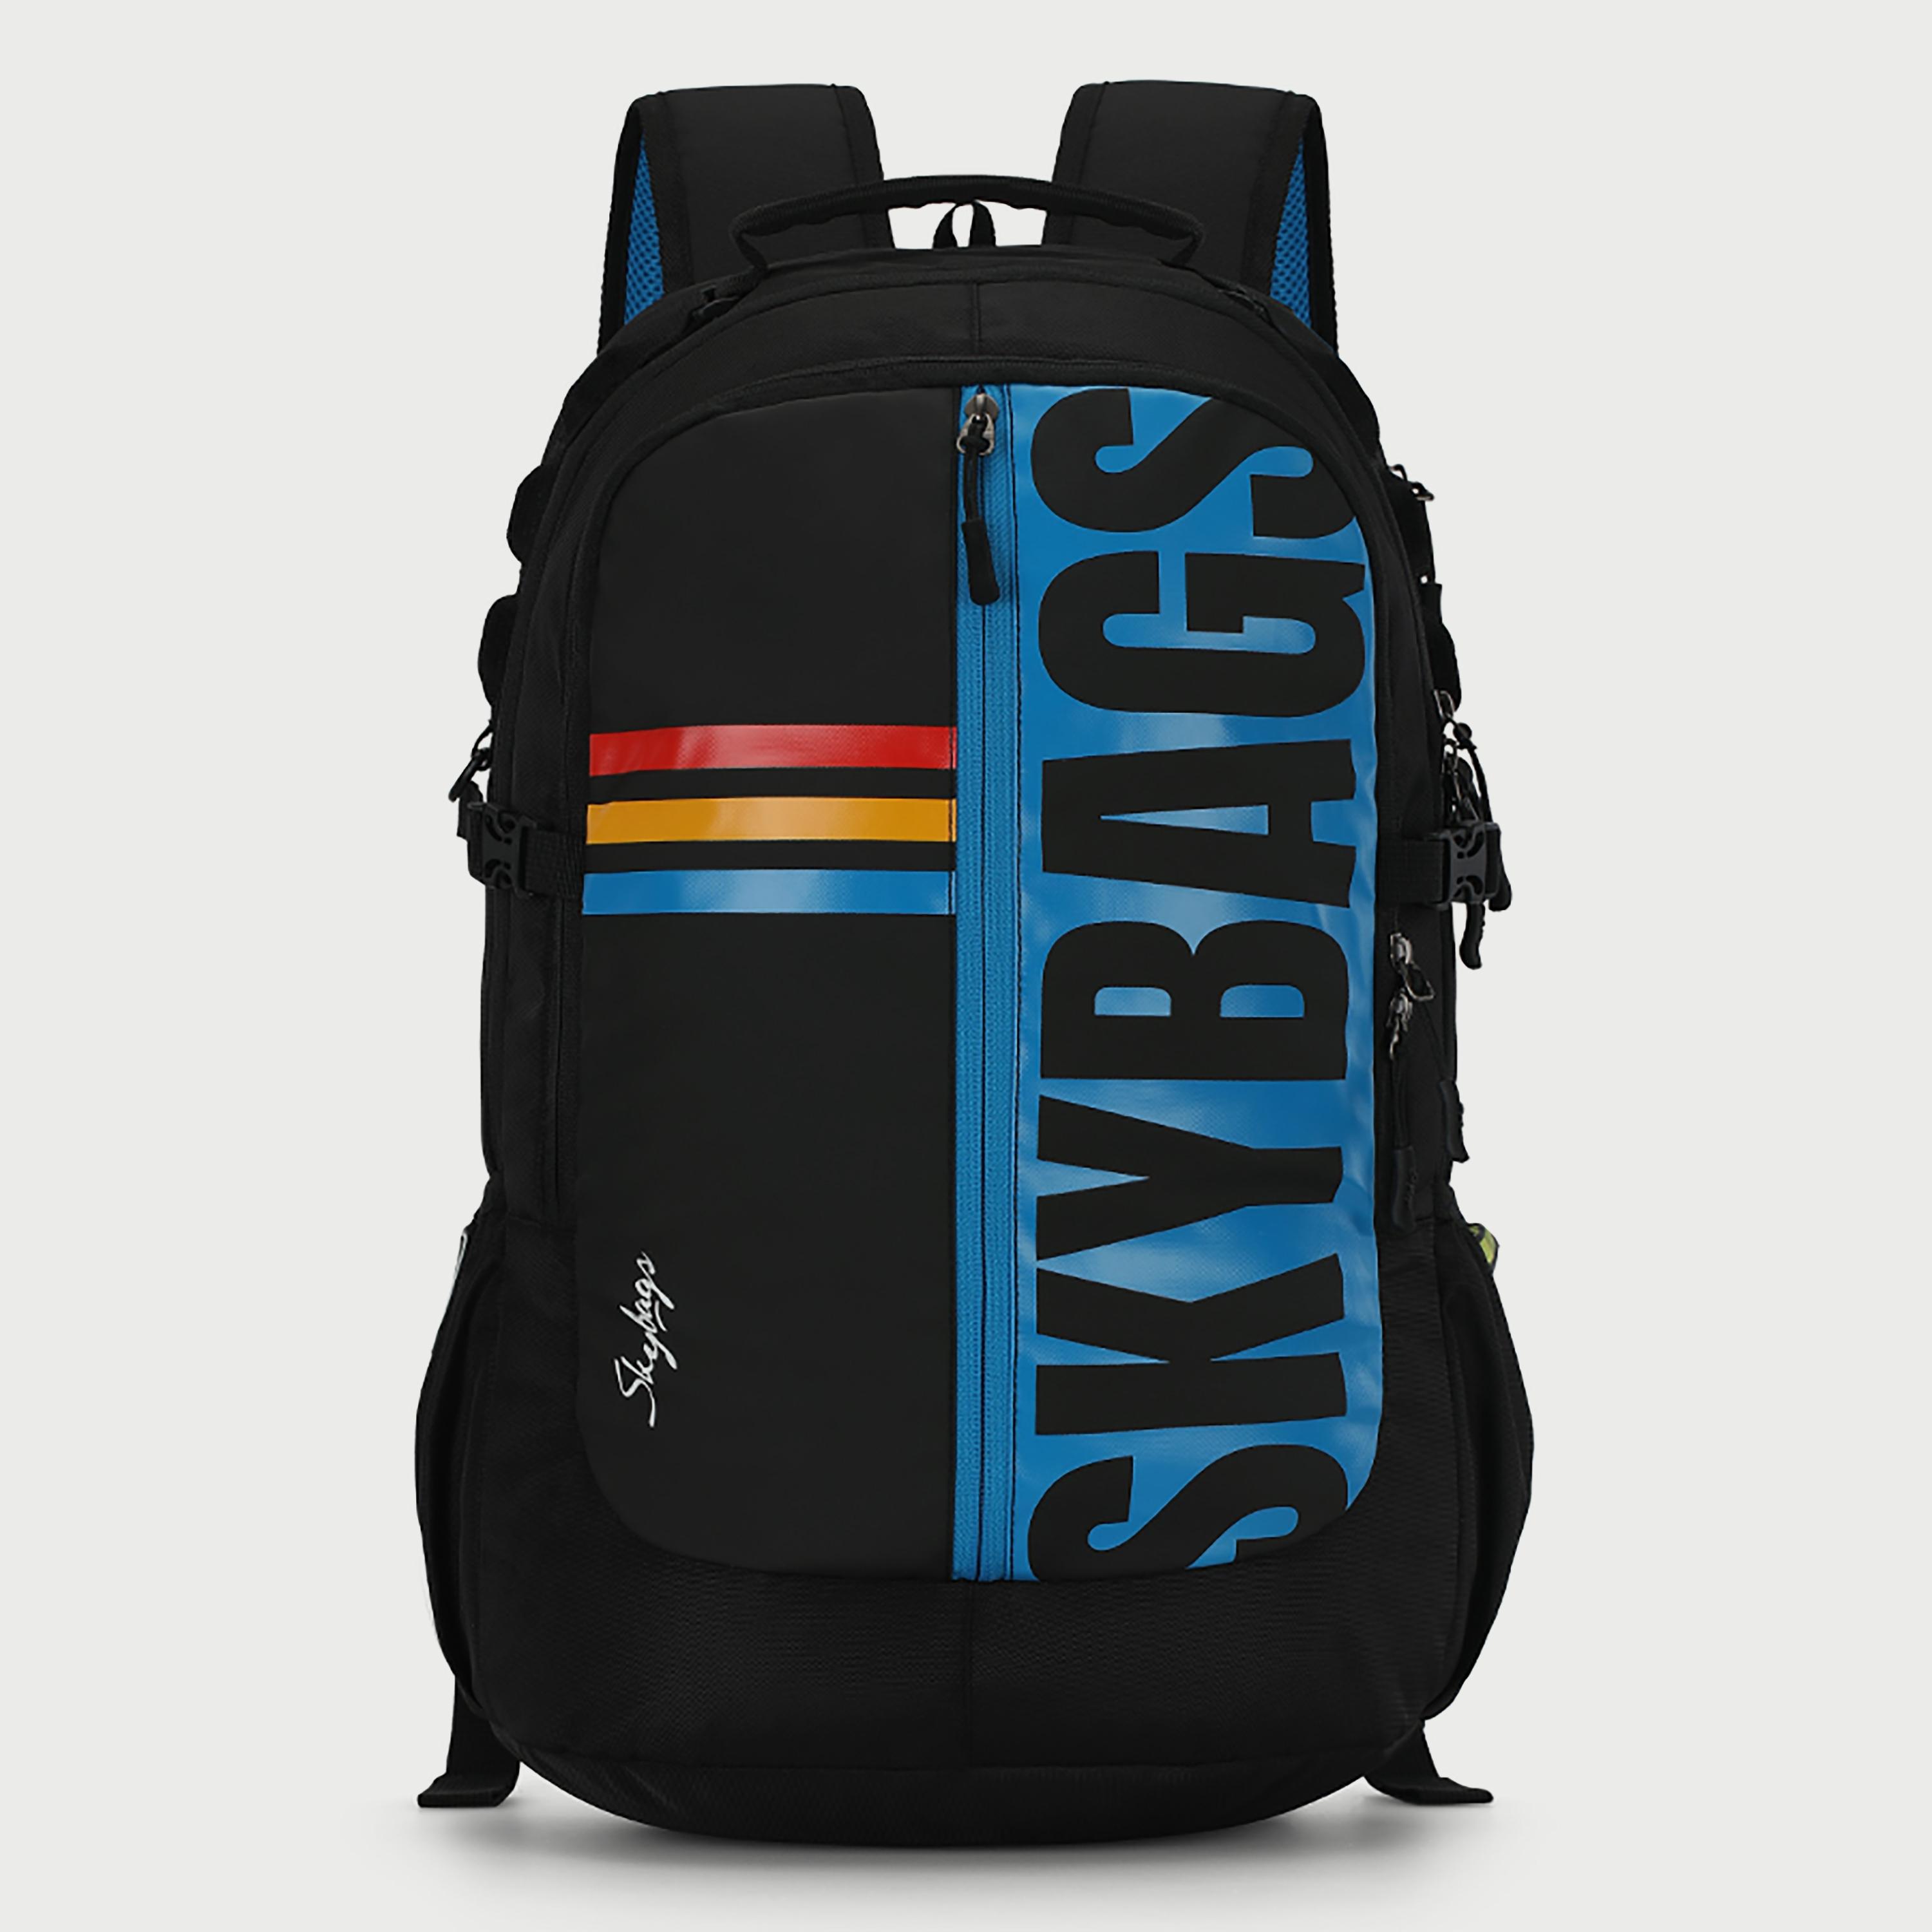 Skybags Strider Pro 02 